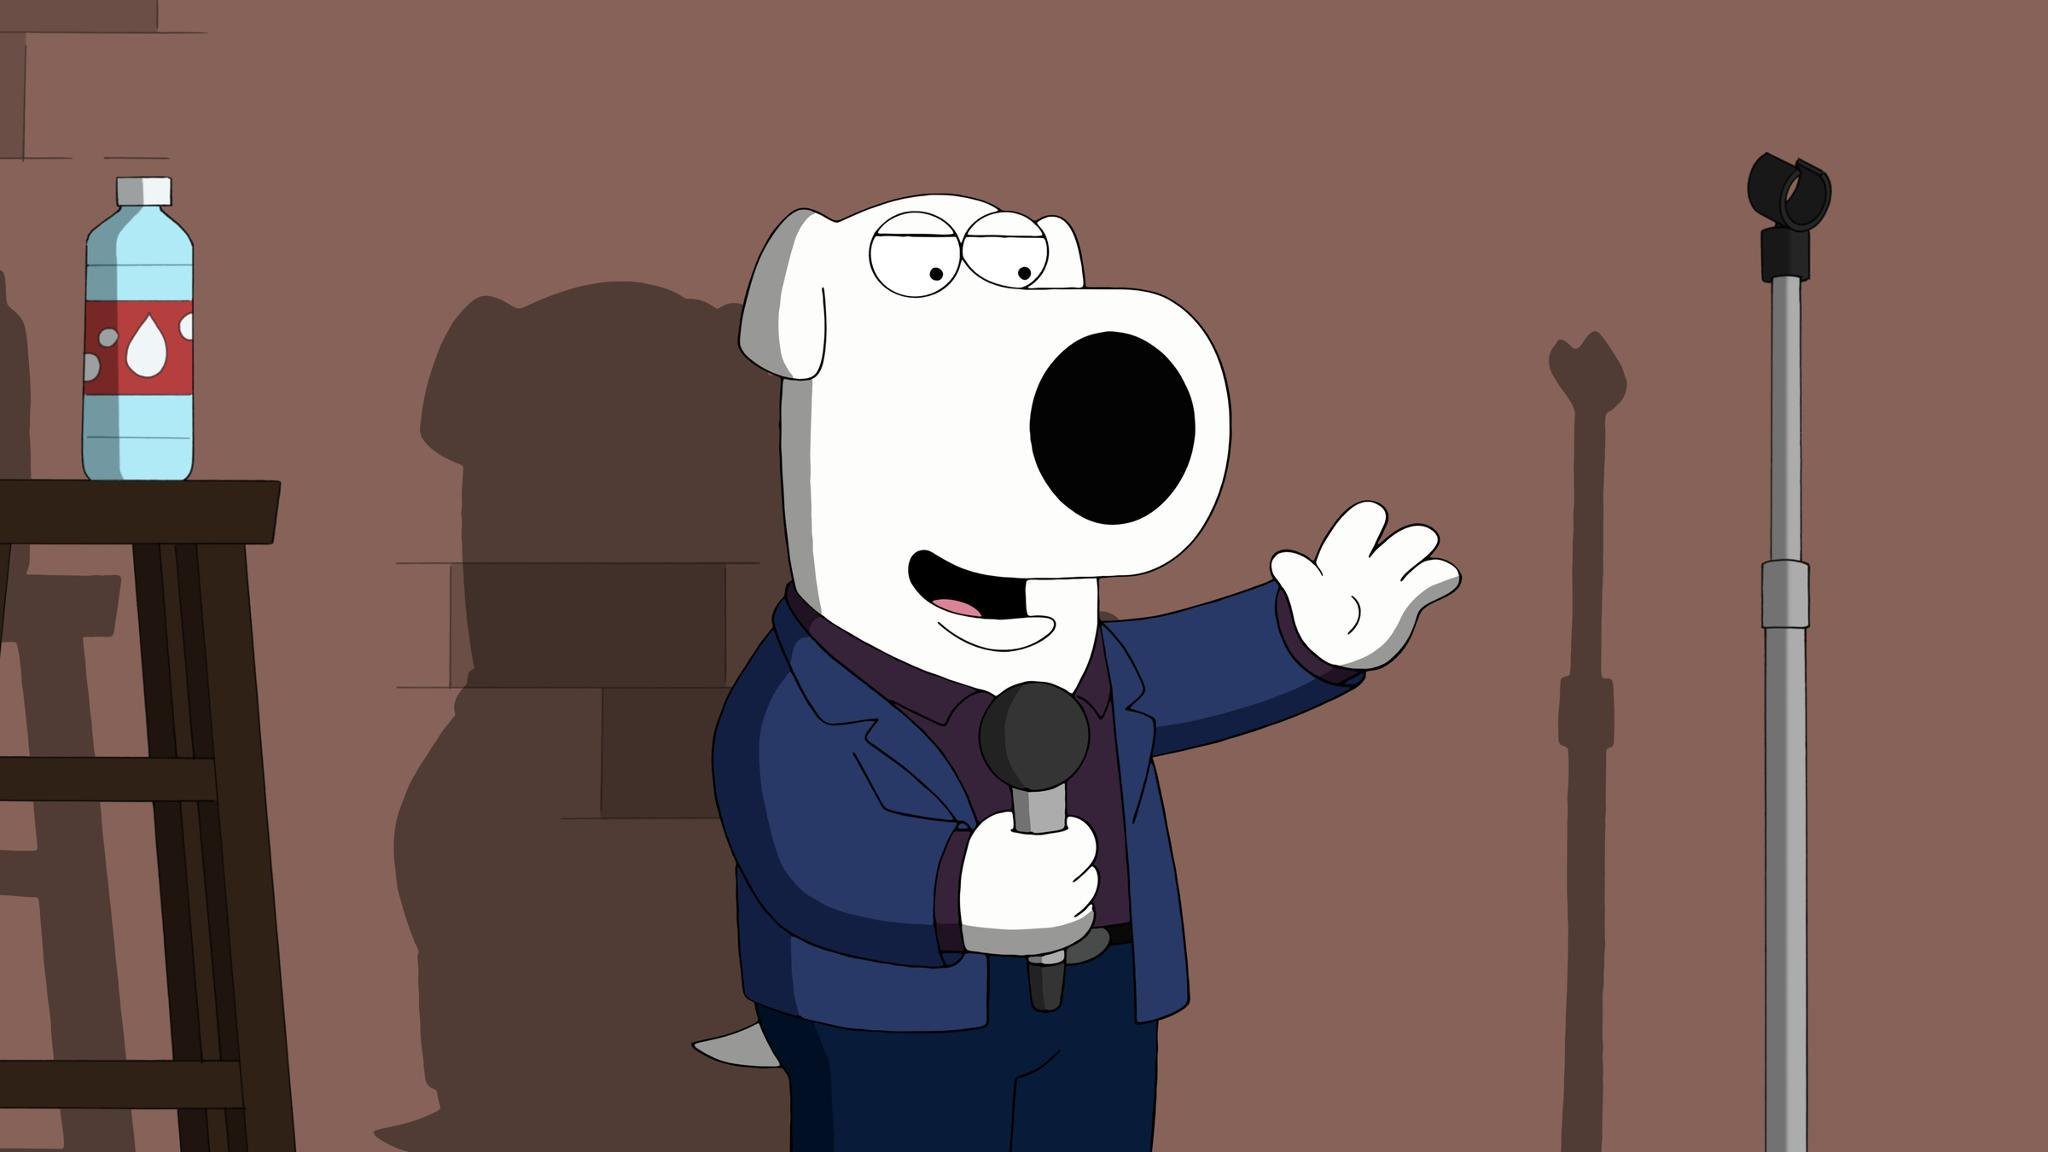 2048x1152 Family Guy on Twitter: "It's Brian Griffin, local stand-up comedian!  #FamilyGuy https://t.co/CUsFlcWCQ3"